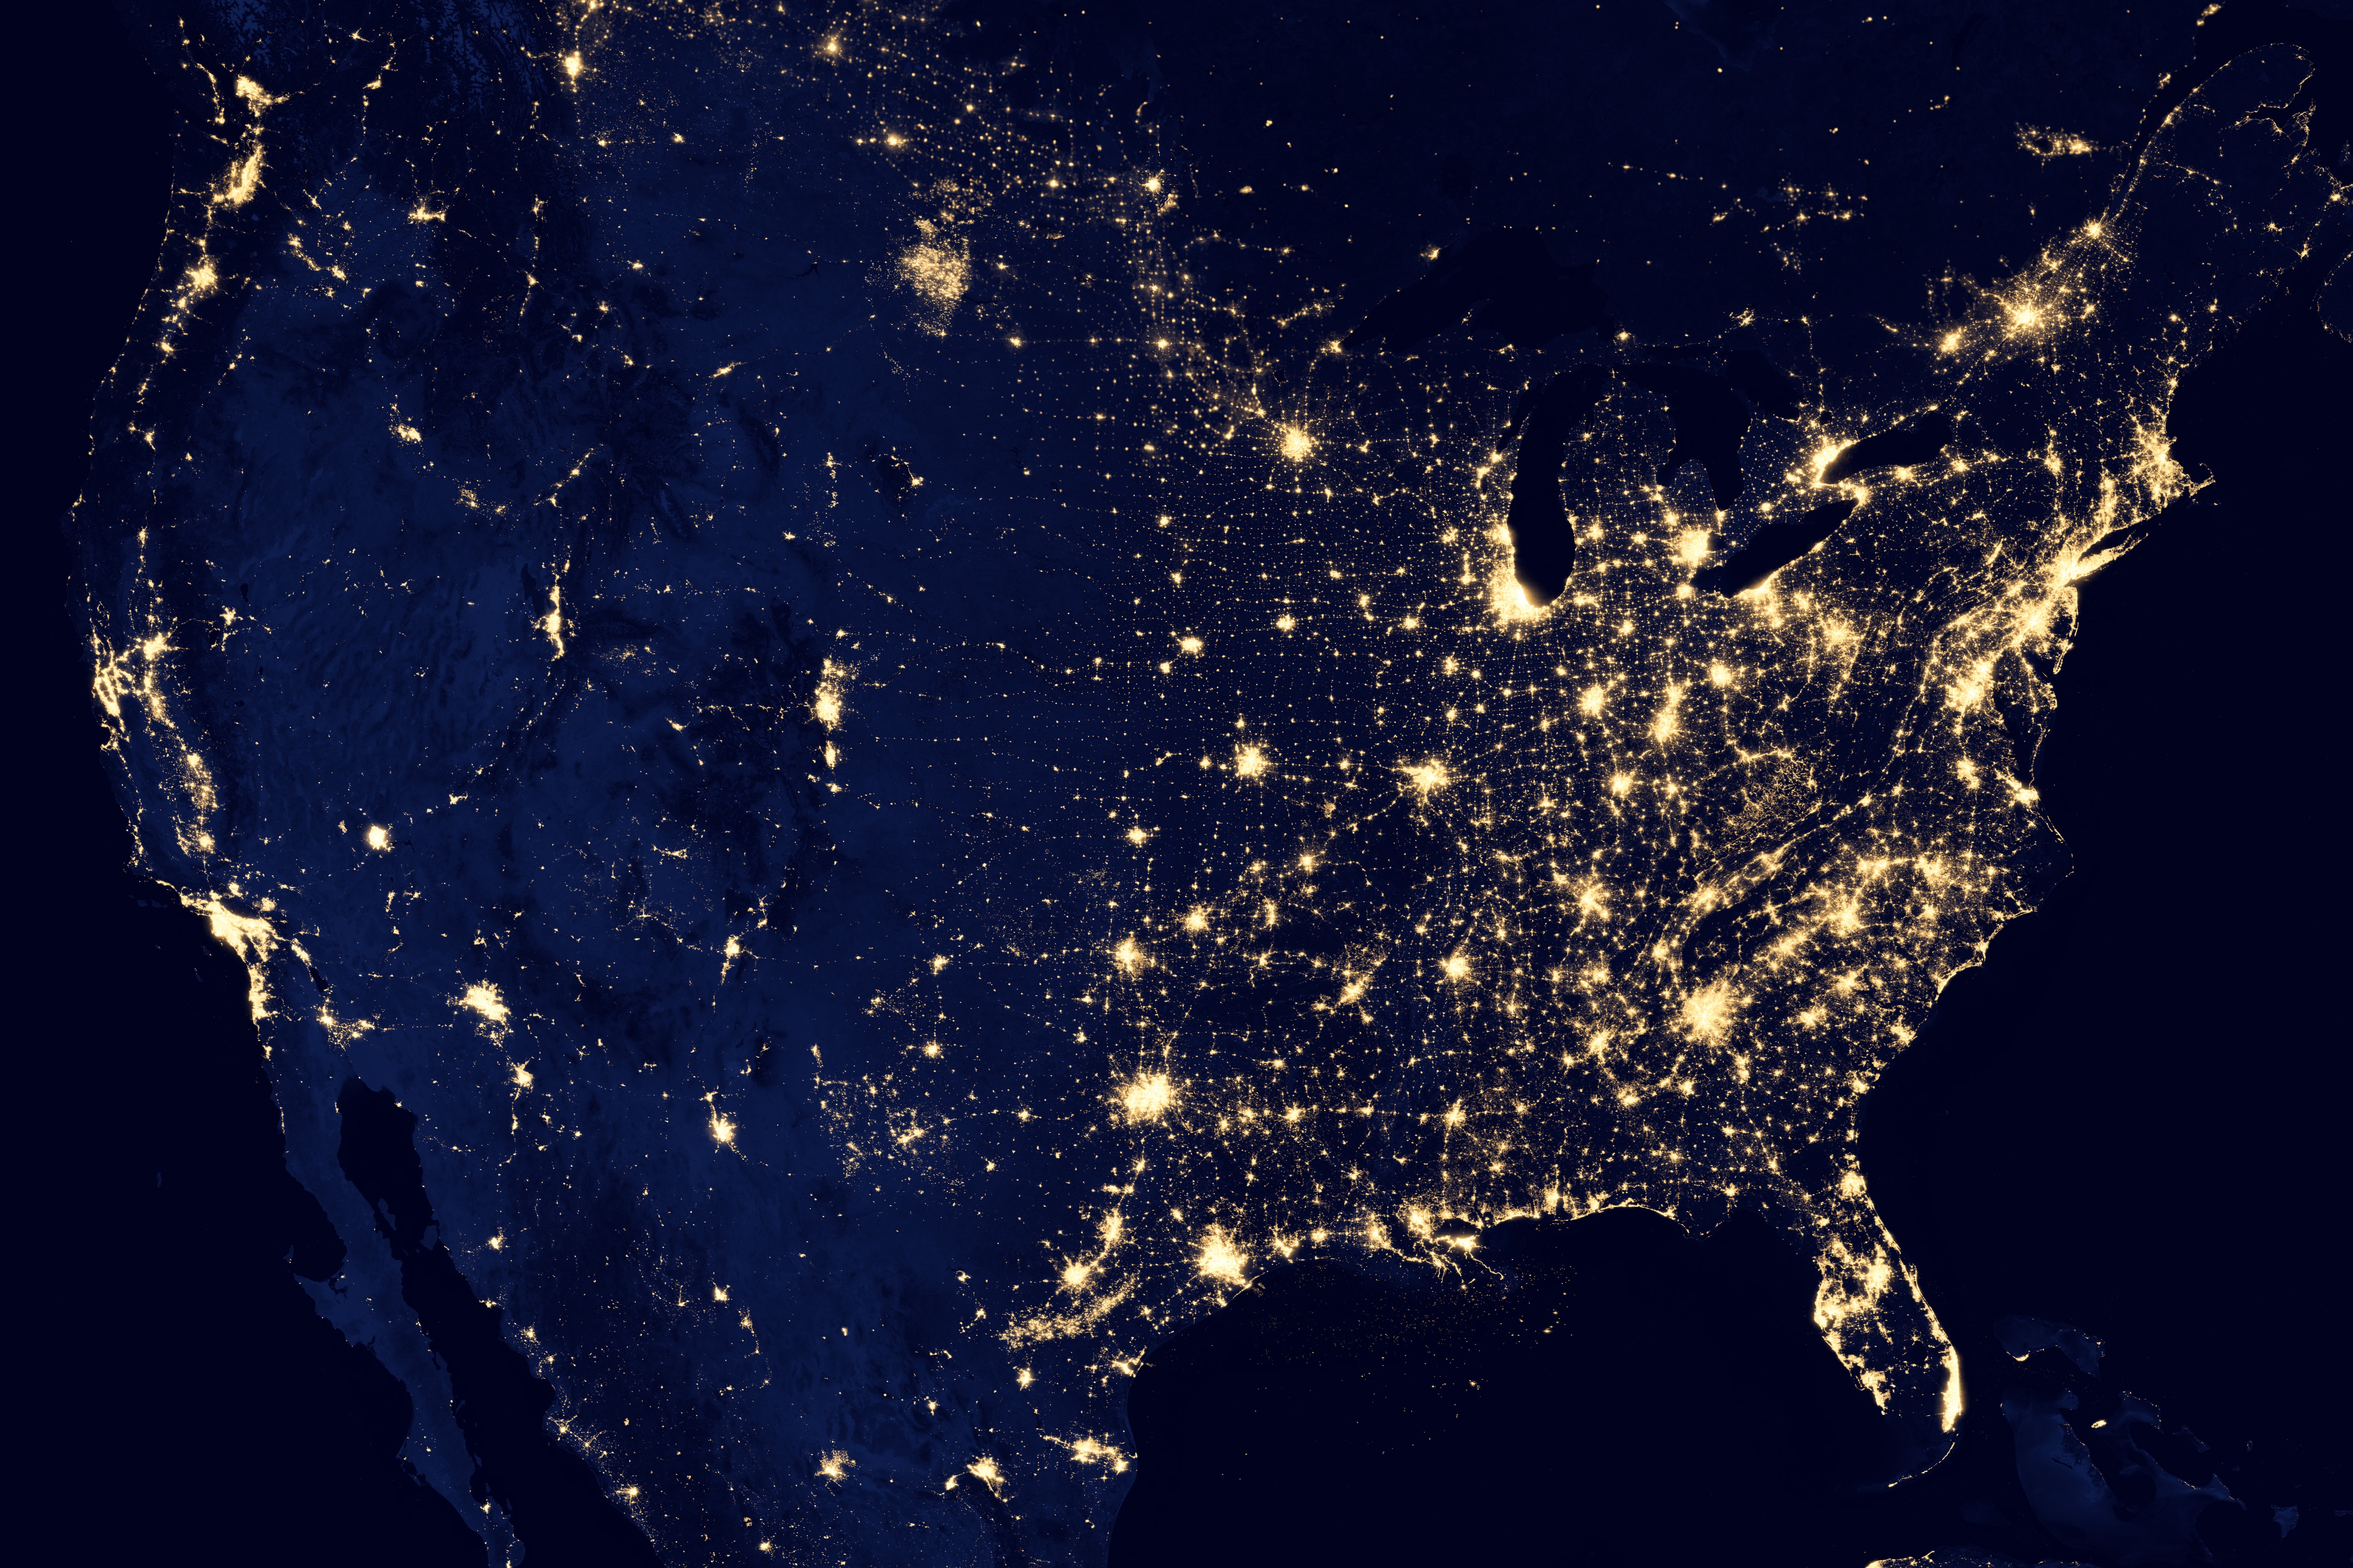 USA satellite image at night with lights.